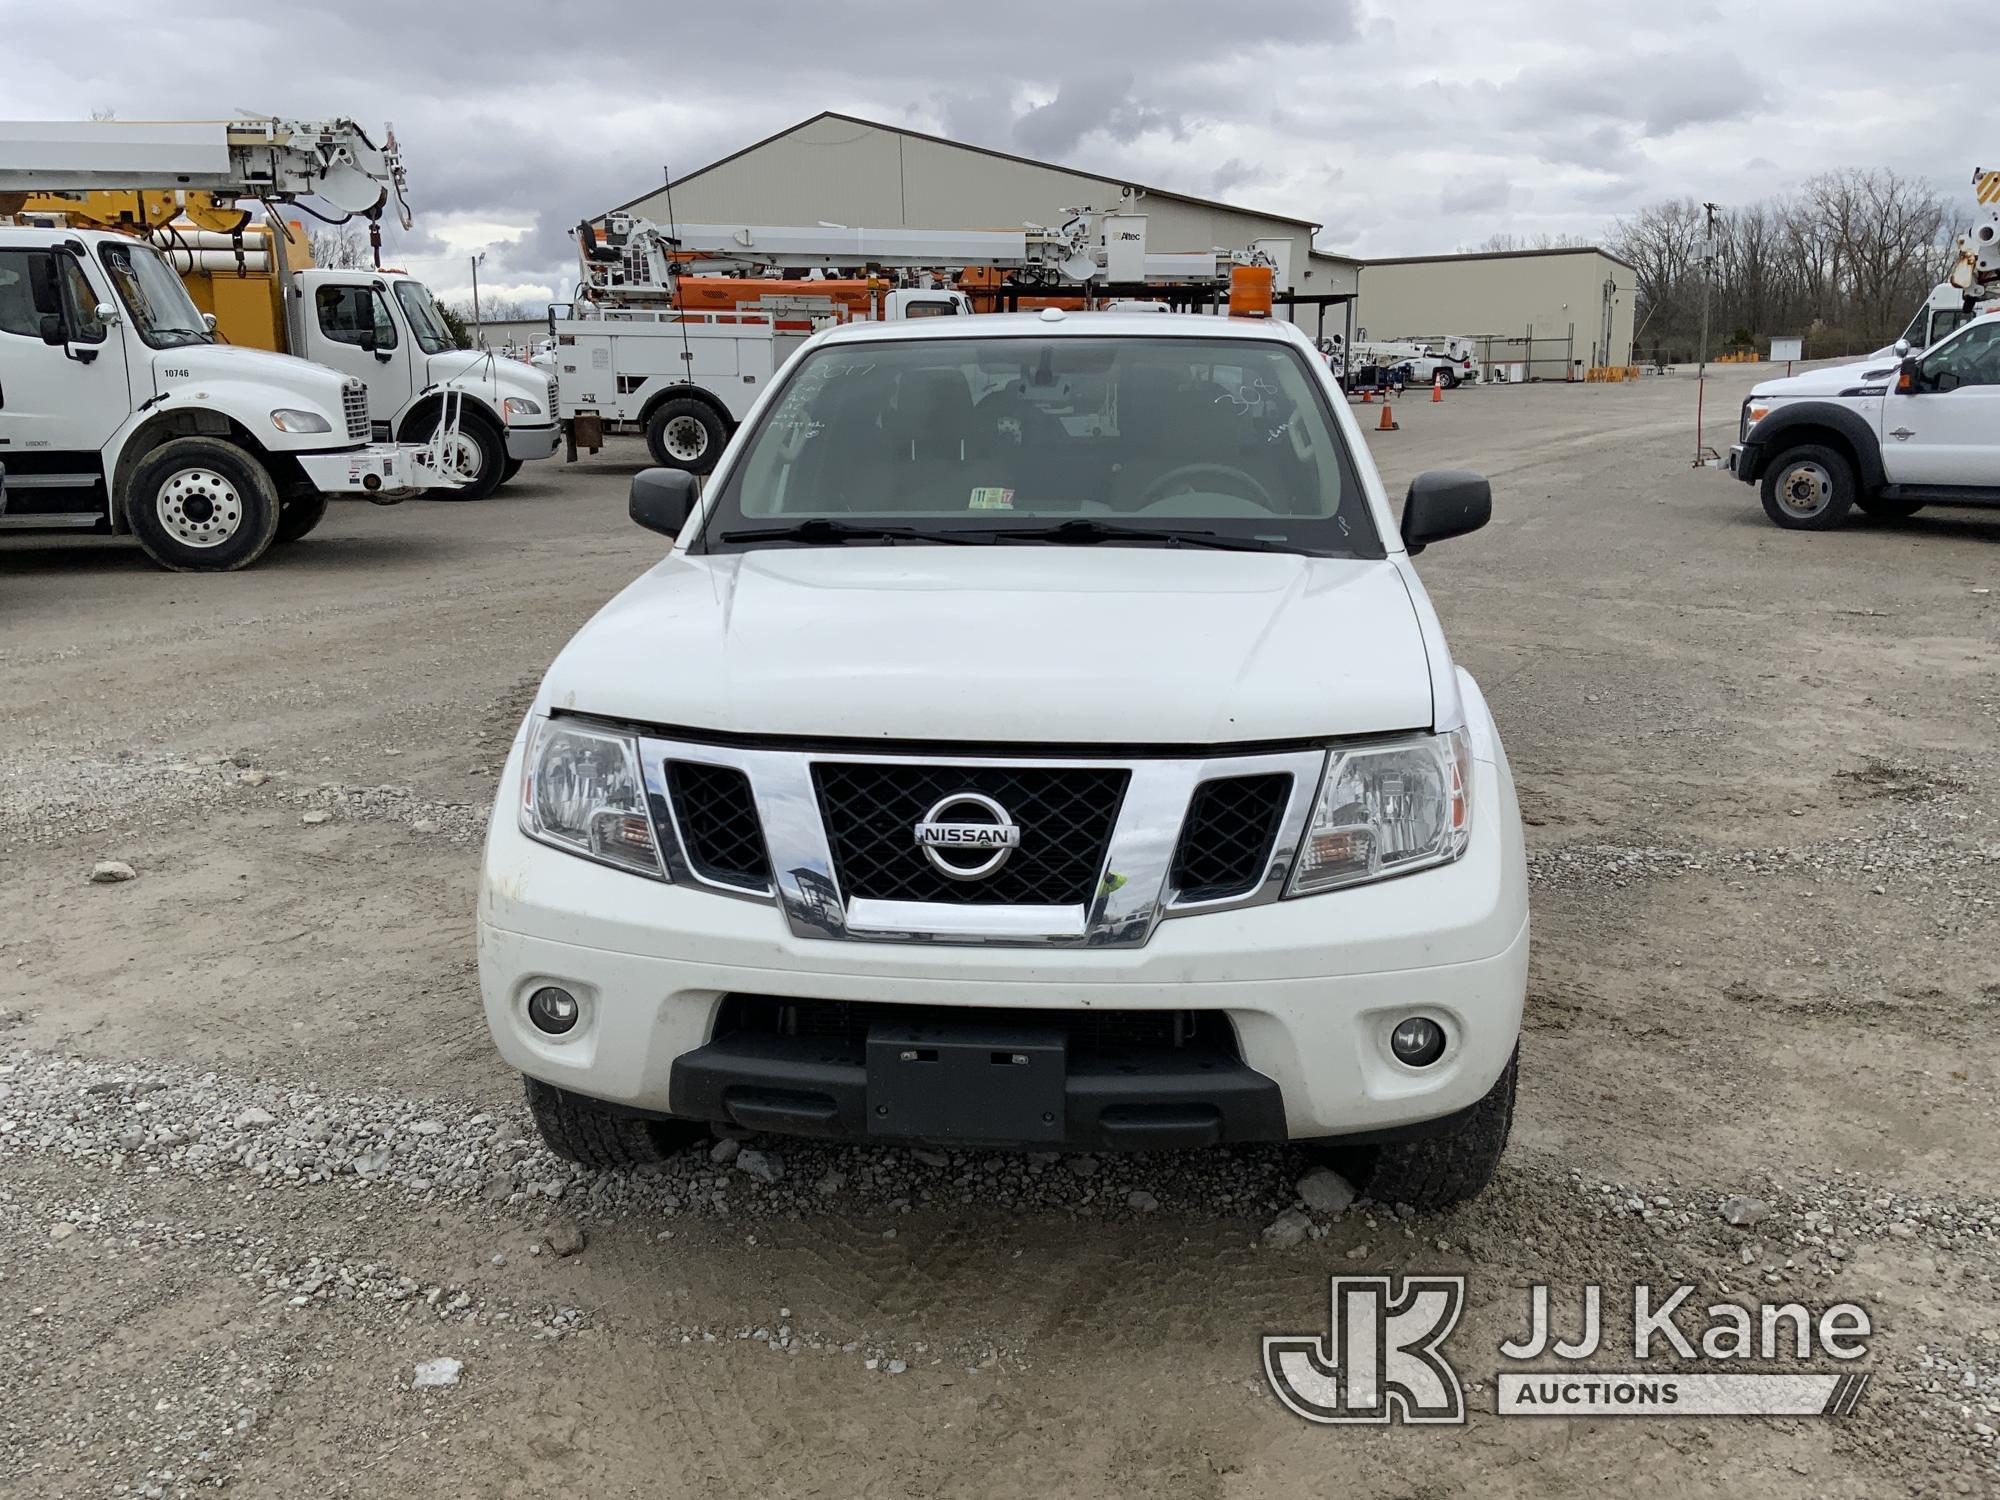 (Fort Wayne, IN) 2017 Nissan Frontier 4x4 Extended-Cab Pickup Truck Runs & Moves) (Paint Damage